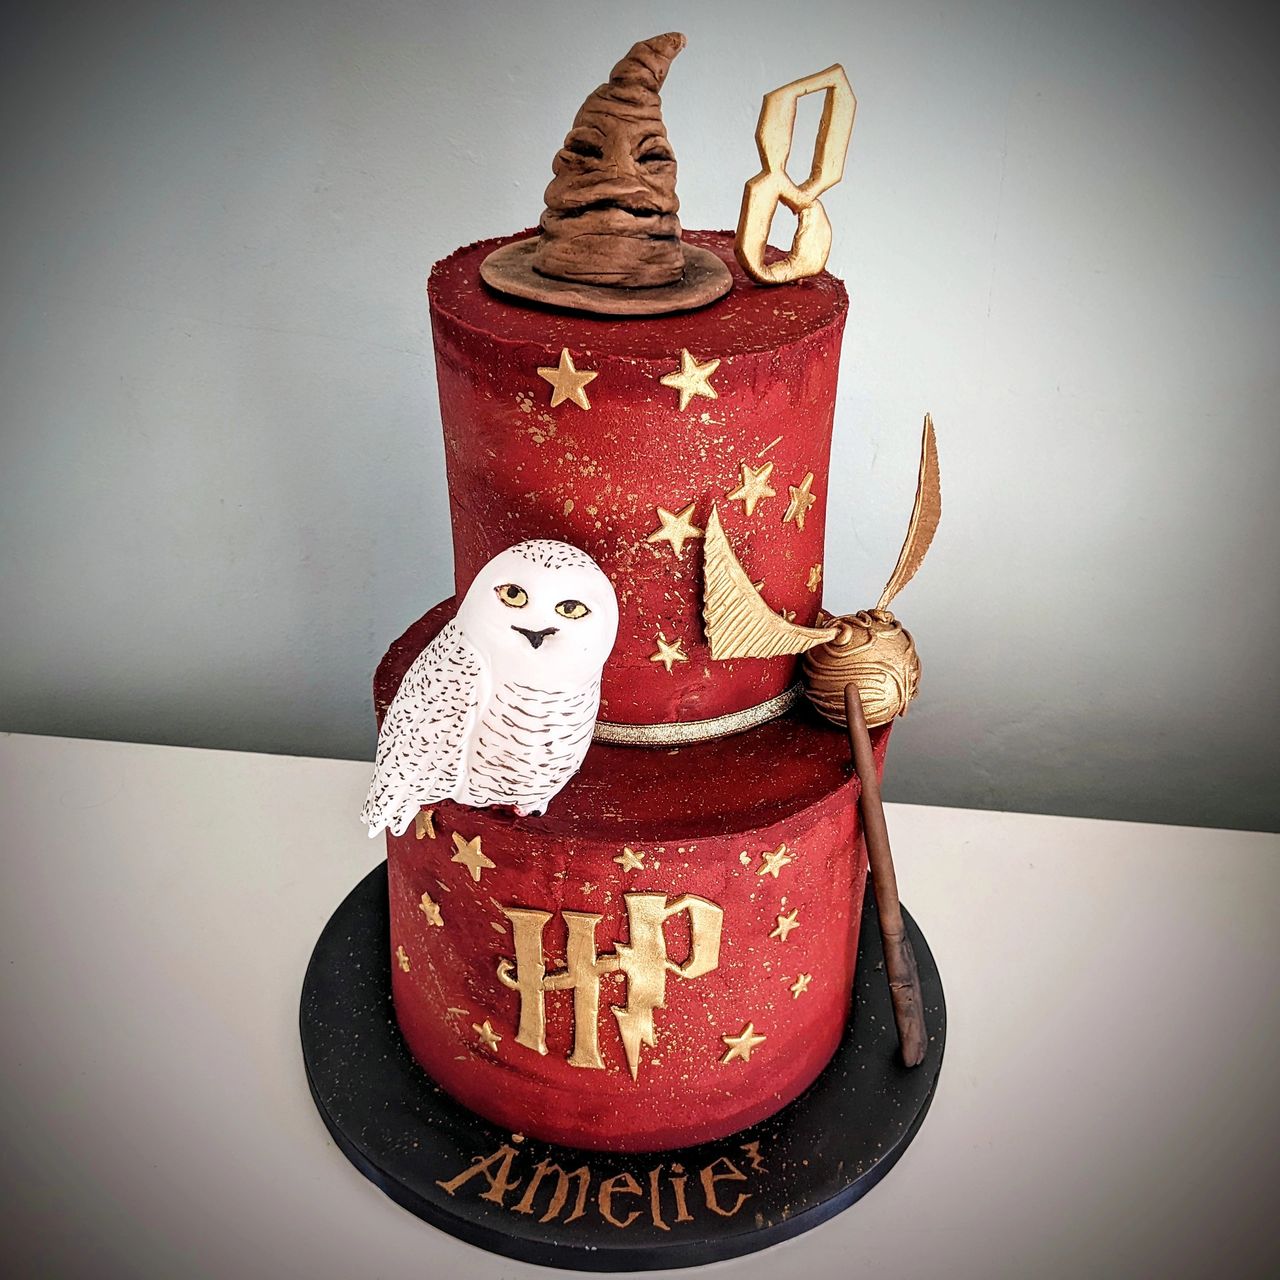 Harry Potter's Eleventh Birthday Cake - The Starving Chef